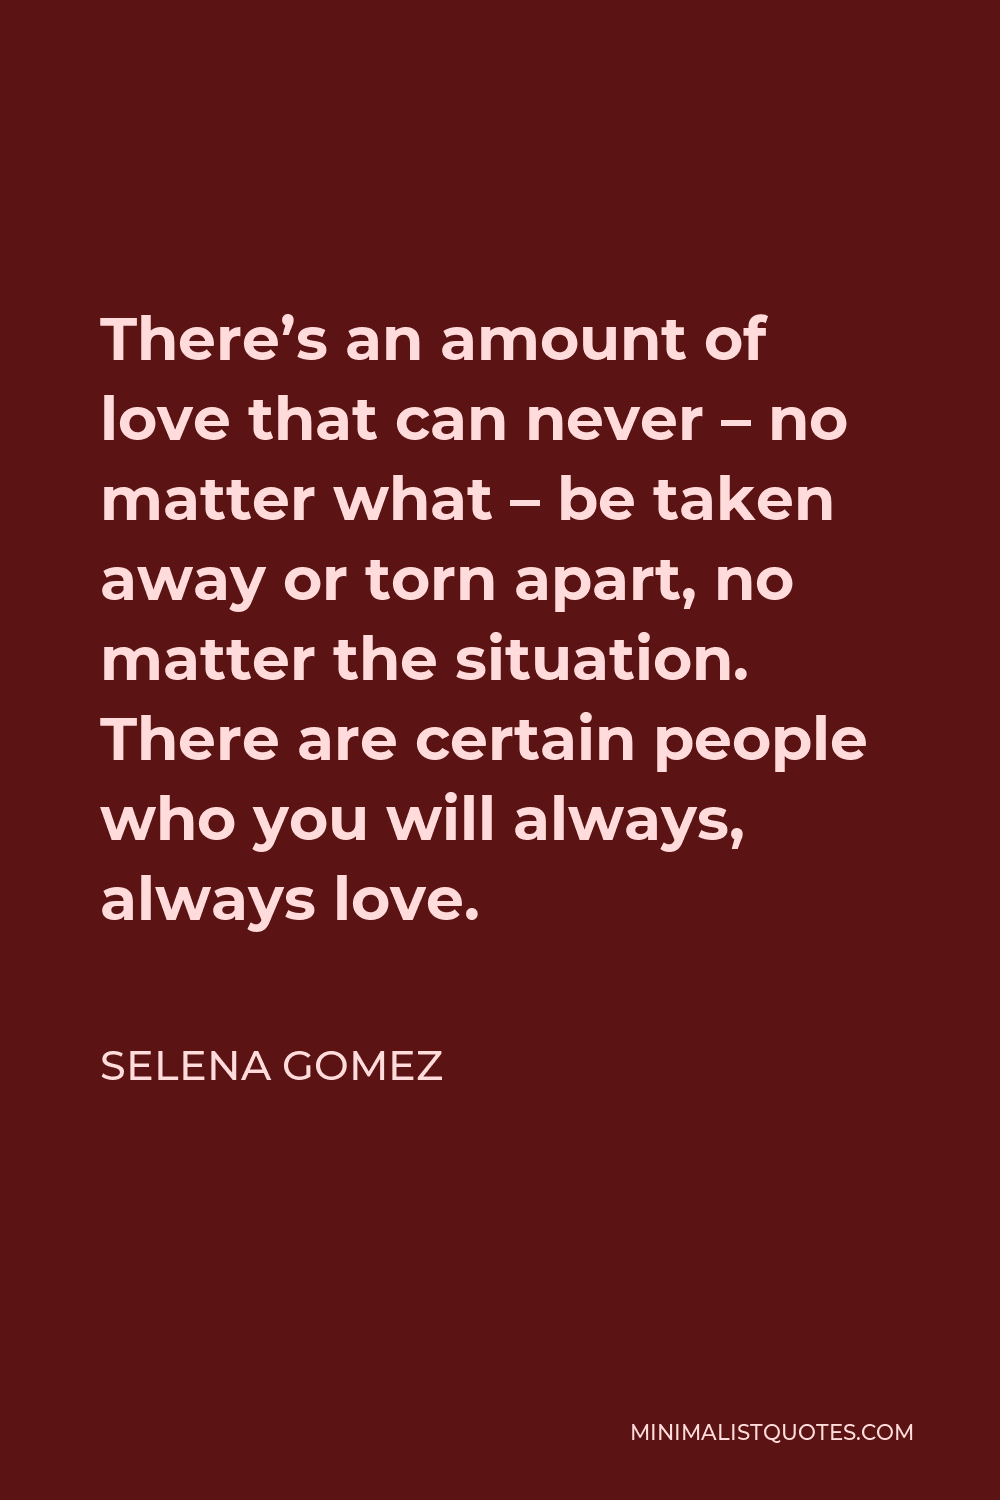 Selena Gomez Quote - There’s an amount of love that can never – no matter what – be taken away or torn apart, no matter the situation. There are certain people who you will always, always love.